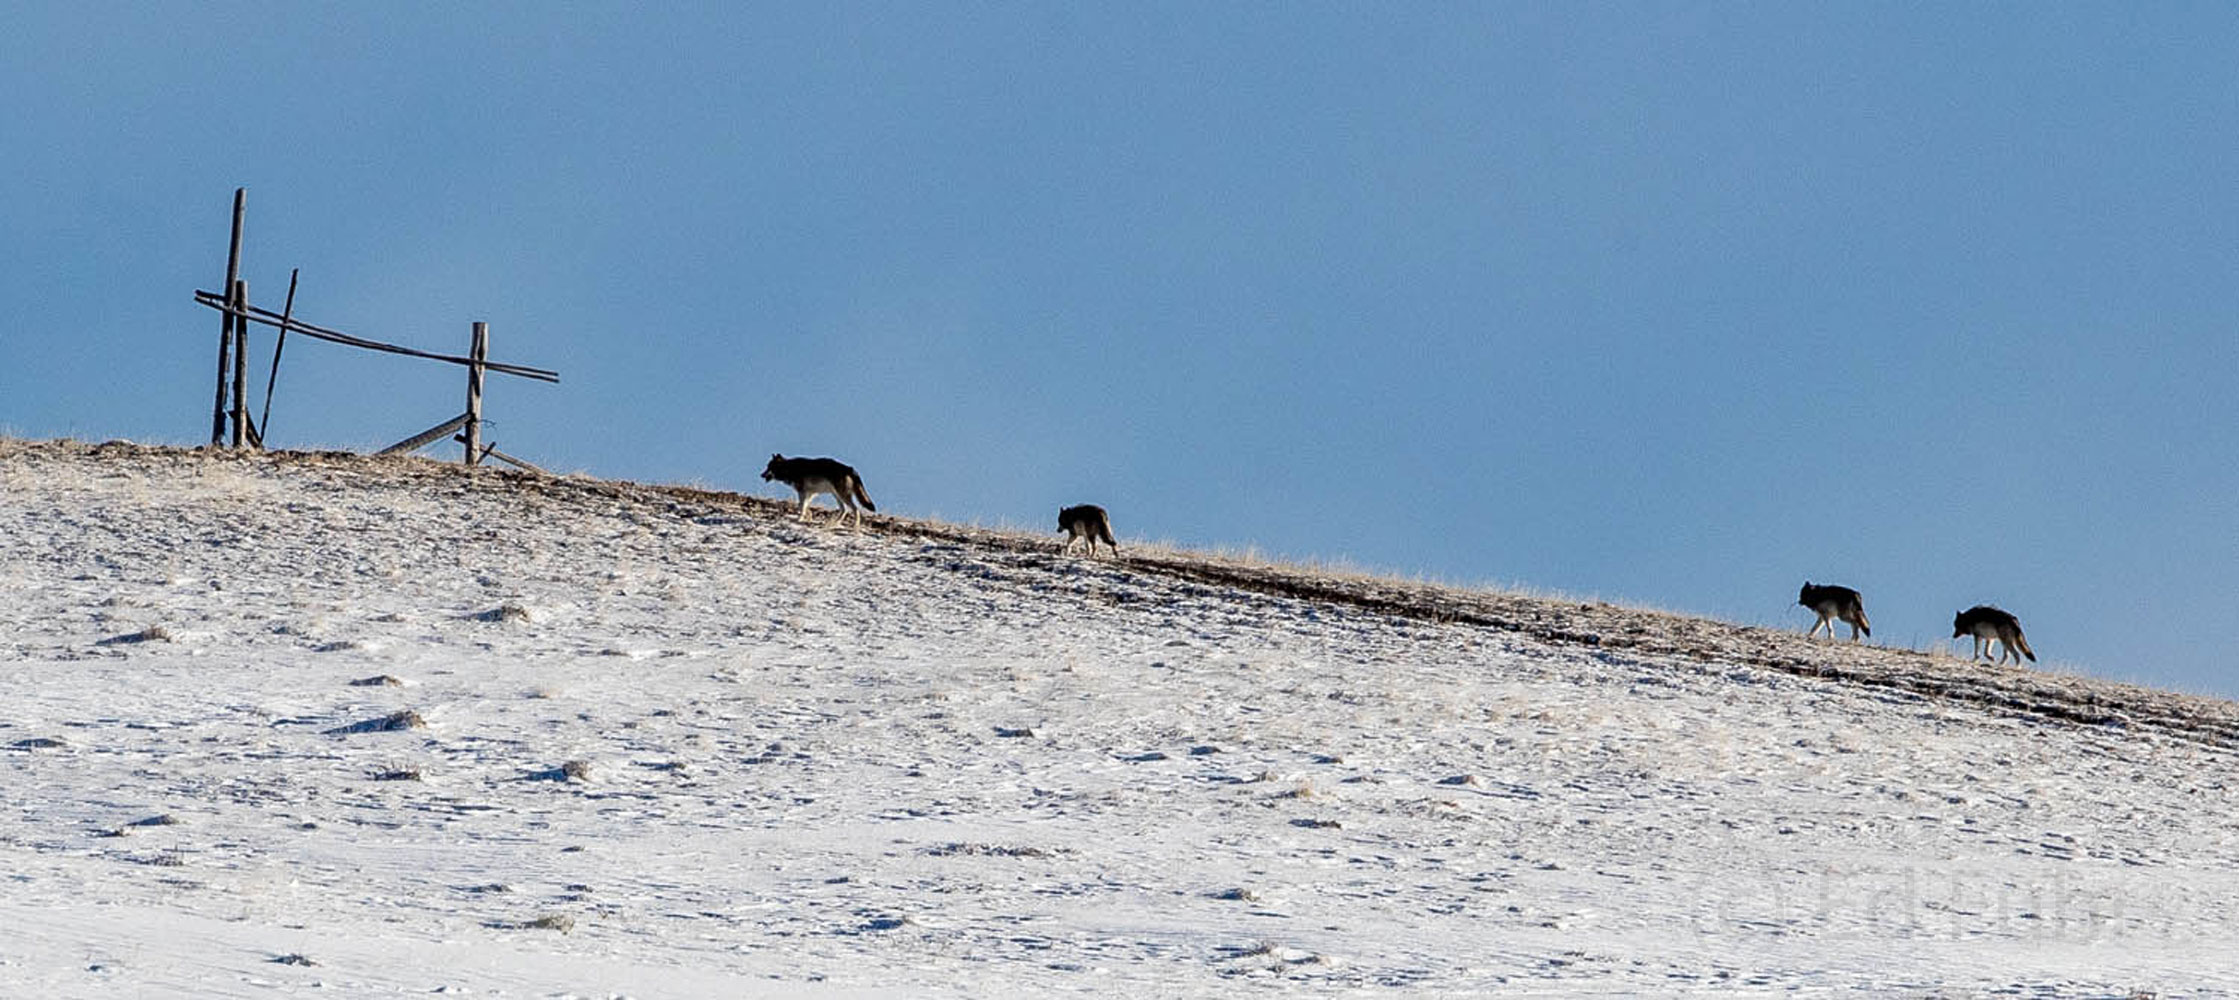 A wolf pack races across this mountain ridge